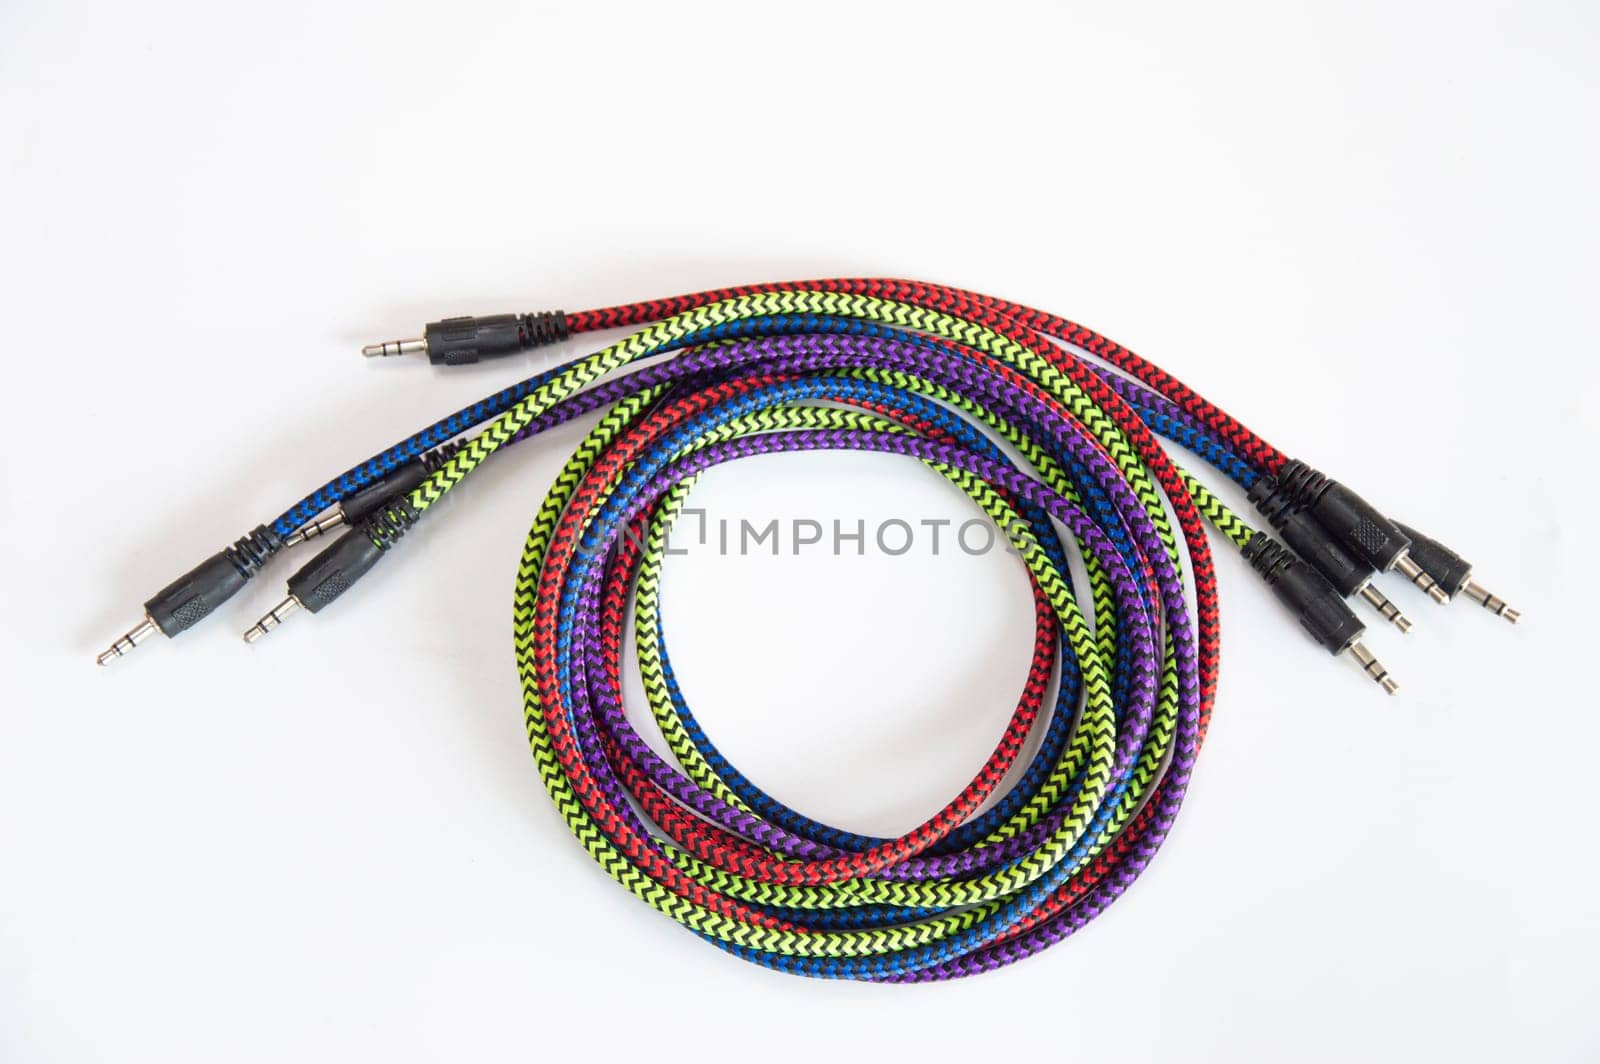 AUX audio cable on a white background